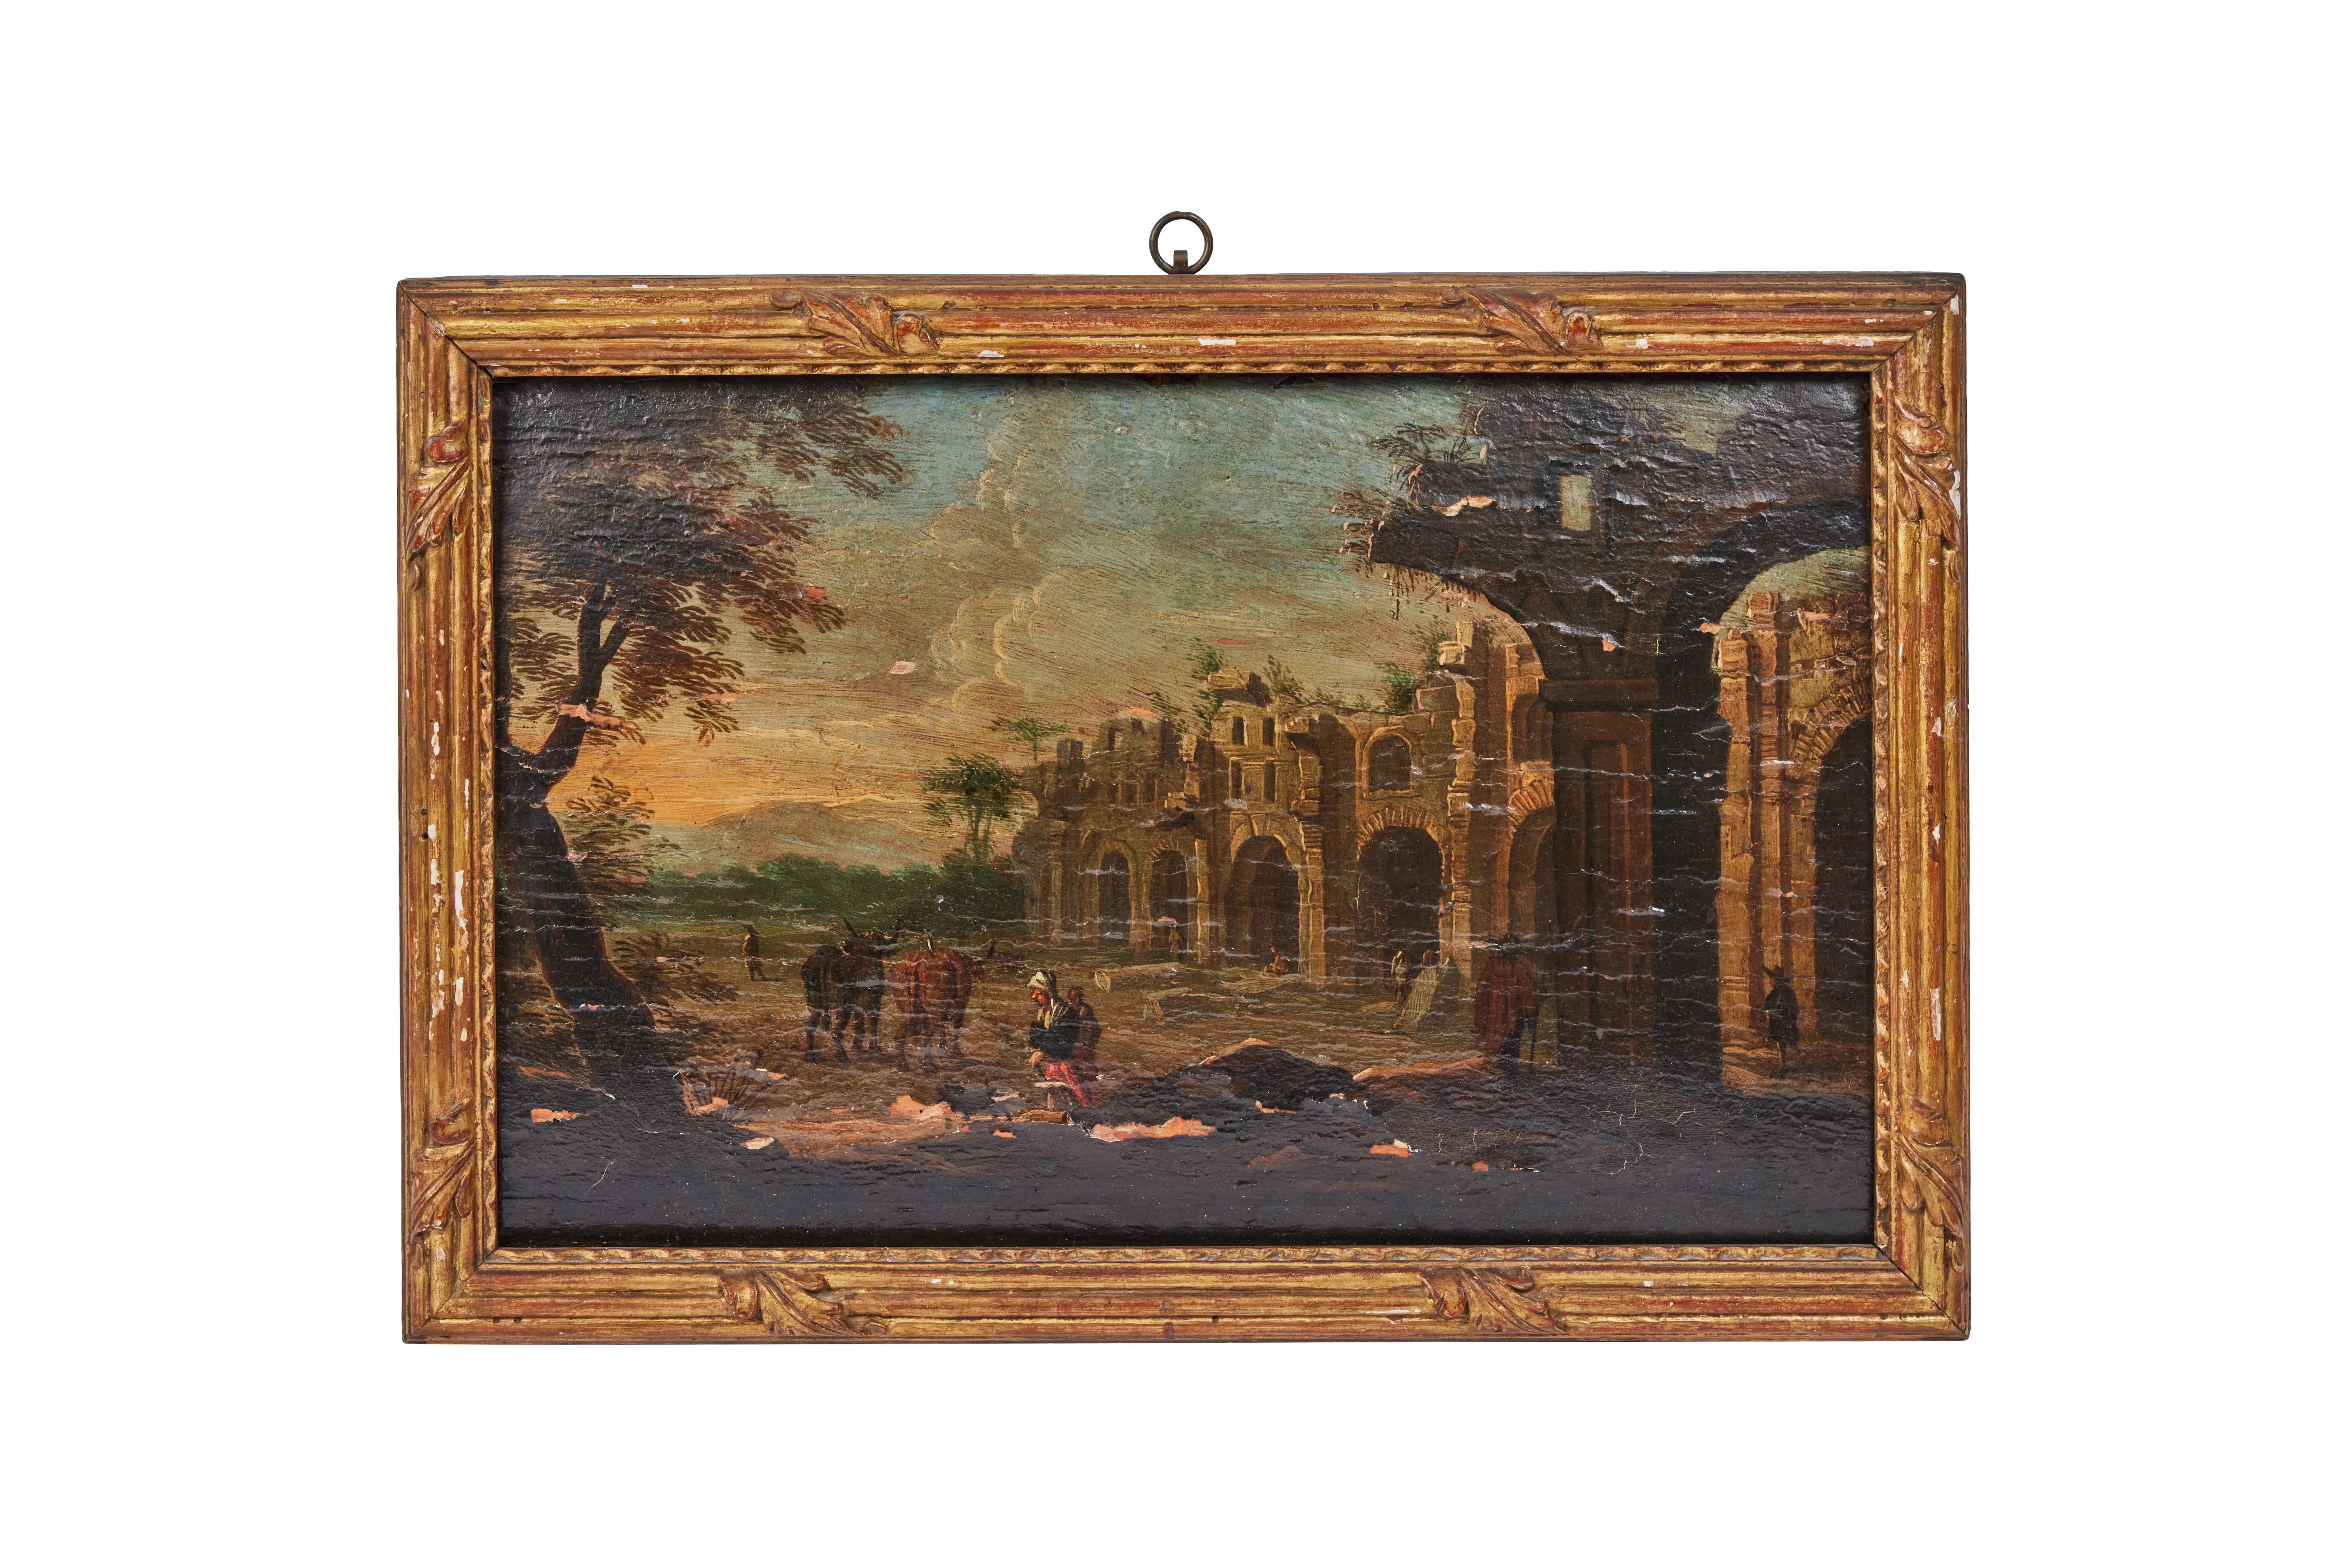 Set of 4 capriccio landscape oil on board paintings from the area of Florence
